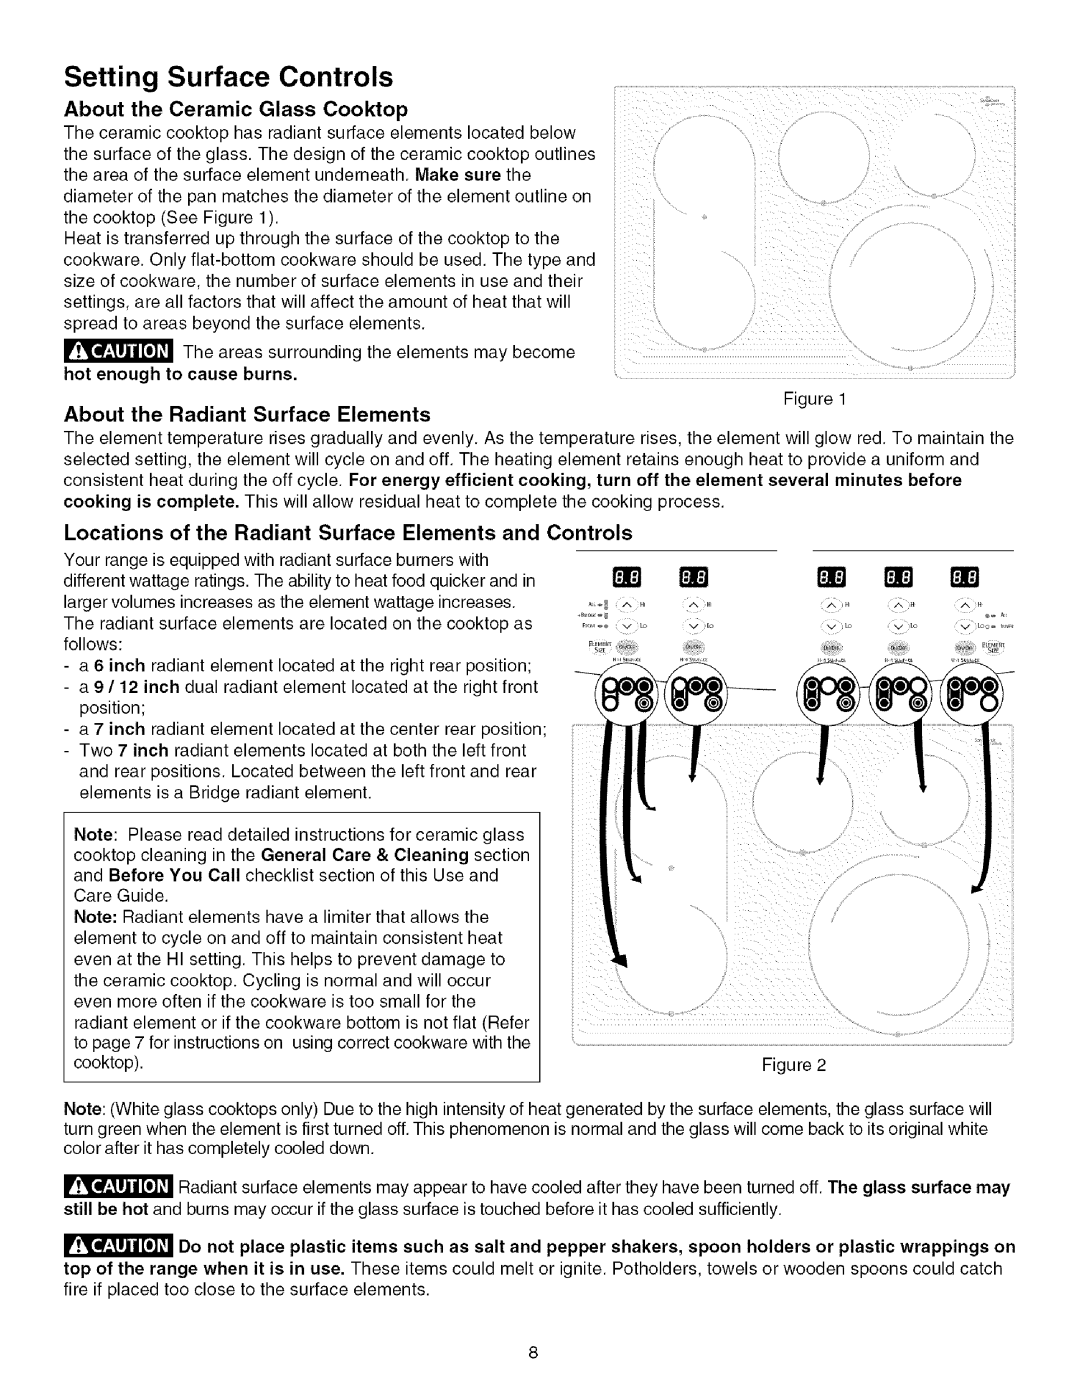 Kenmore 790.4672 manual Setting Surface Controls, About the Ceramic Glass Cooktop 